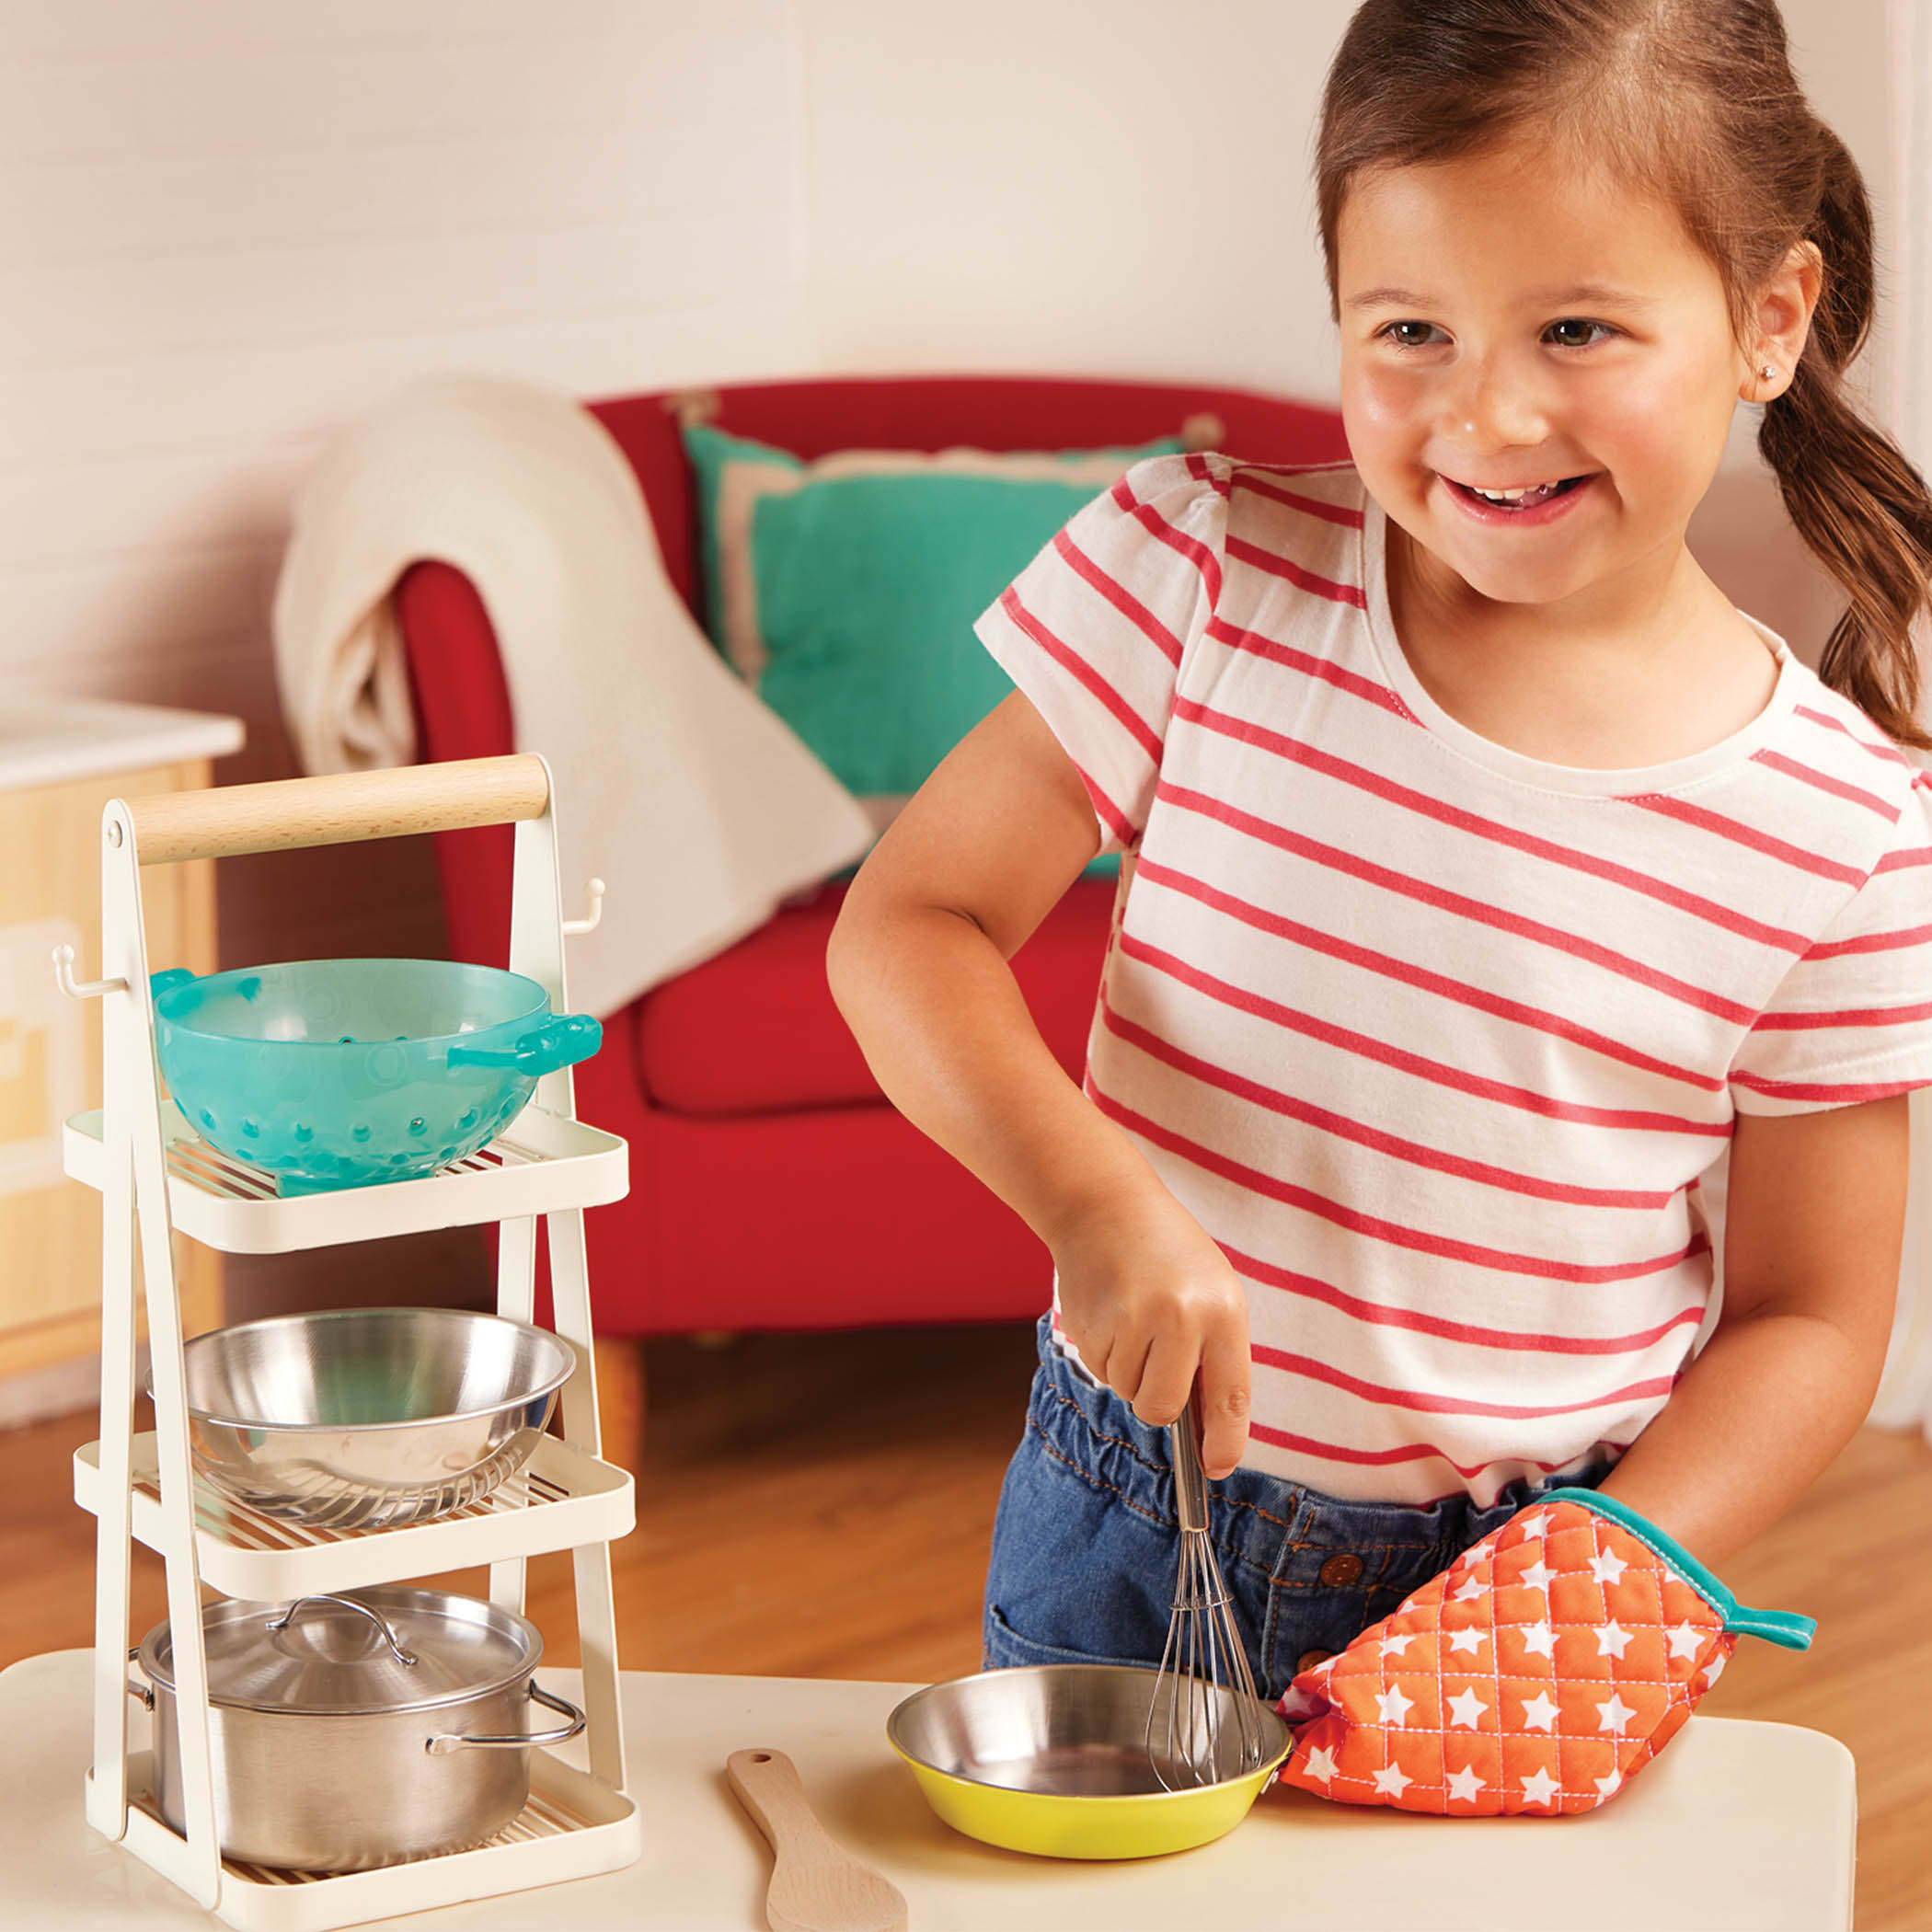 Mini Chef Kitchen Set, Toy Cooking Accessories